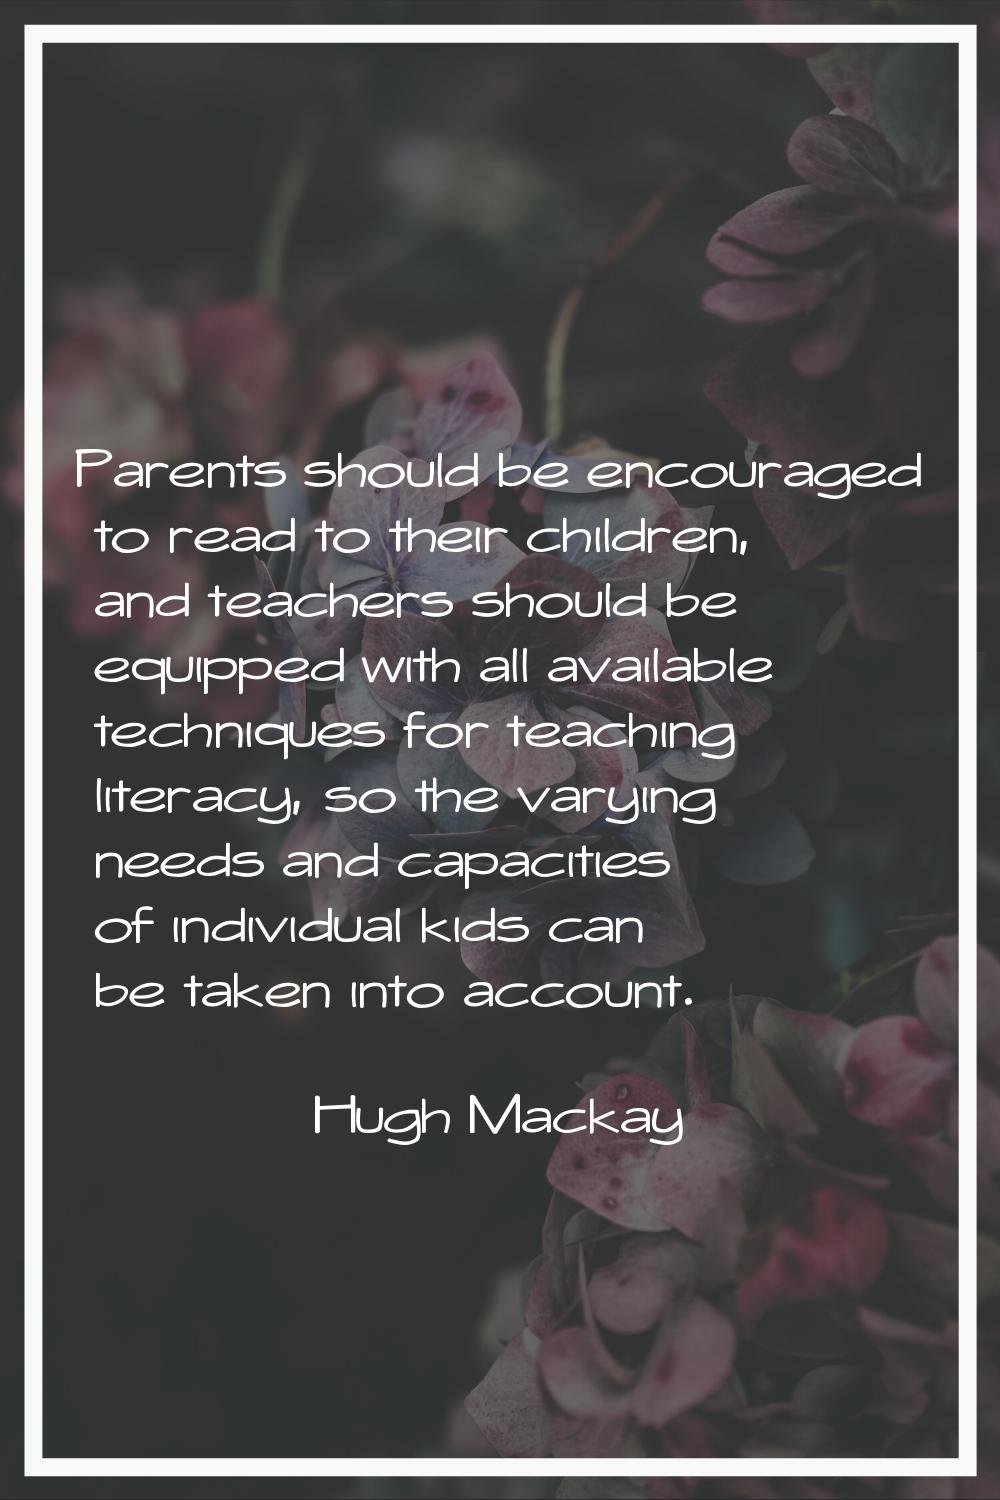 Parents should be encouraged to read to their children, and teachers should be equipped with all av